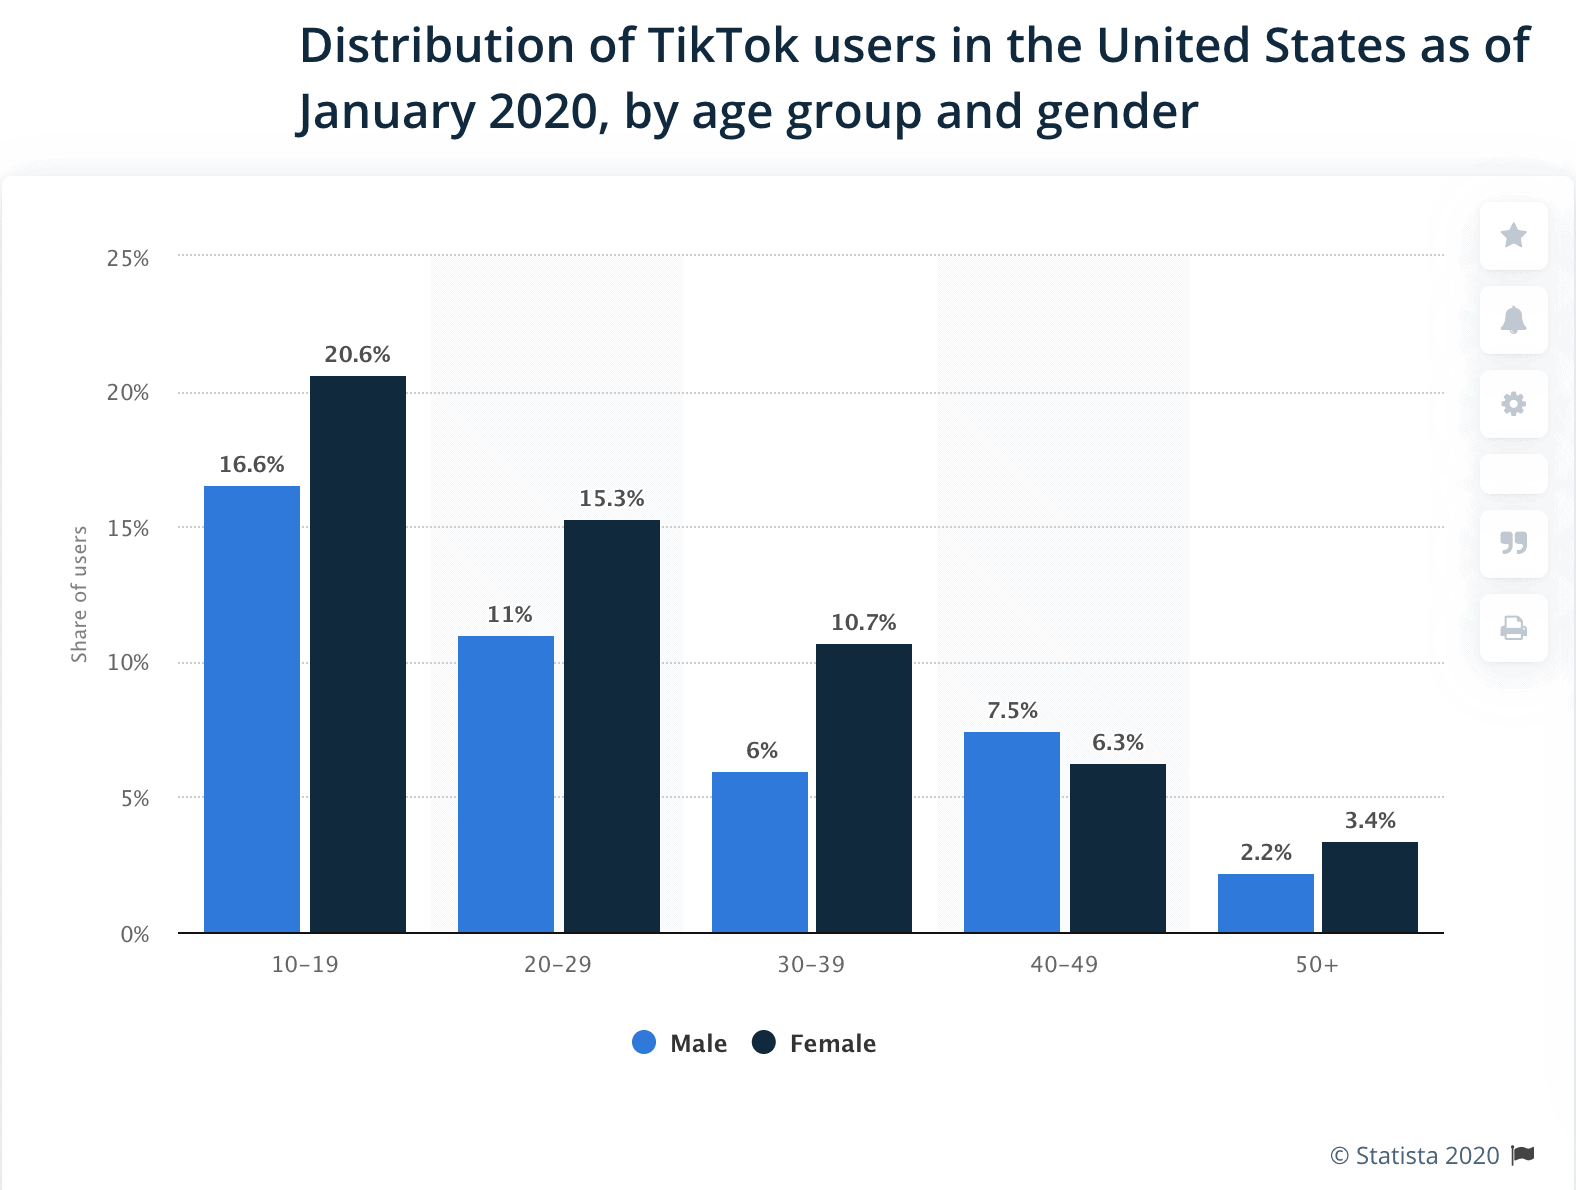 Distribution of TikTok users in the United States as of January 2020, by age group and gender